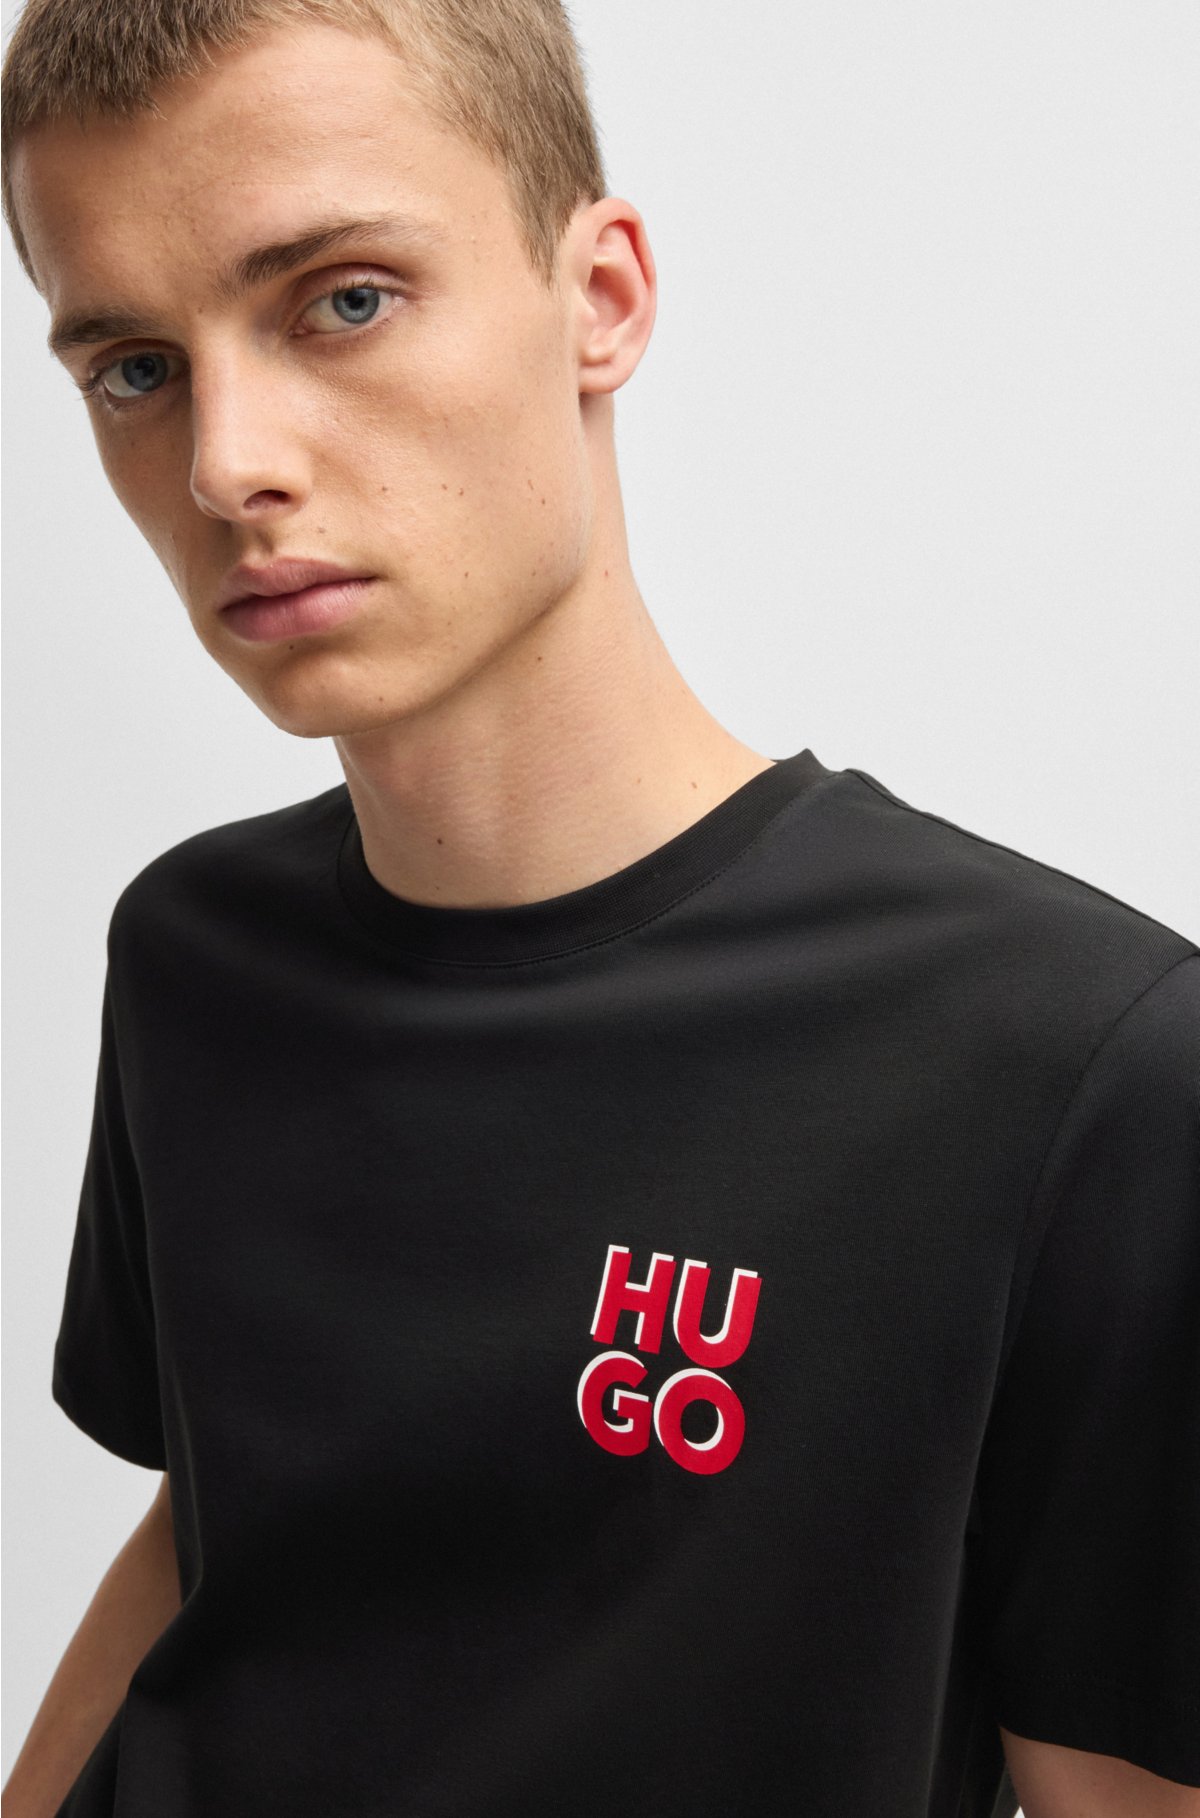 Cotton-jersey T-shirt with stacked logo print, Black